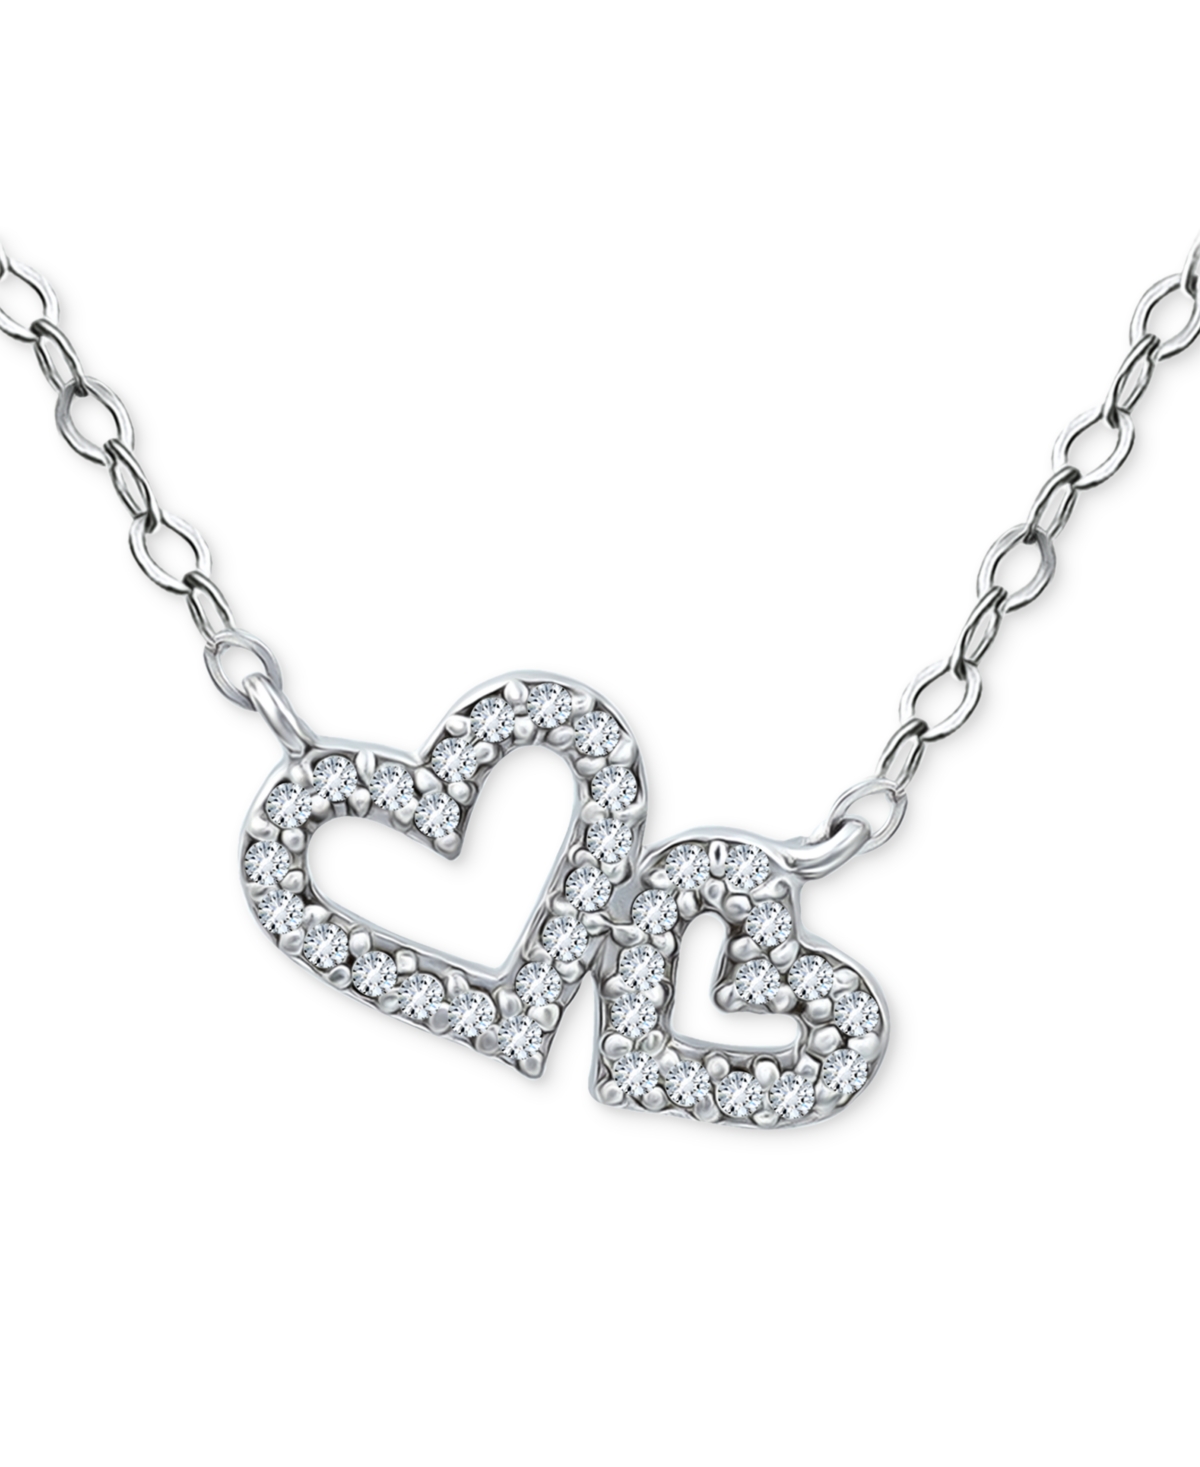 Giani Bernini Cubic Zirconia Double Heart Pendant Necklace, 16" + 2" Extender, Created For Macy's In Silver